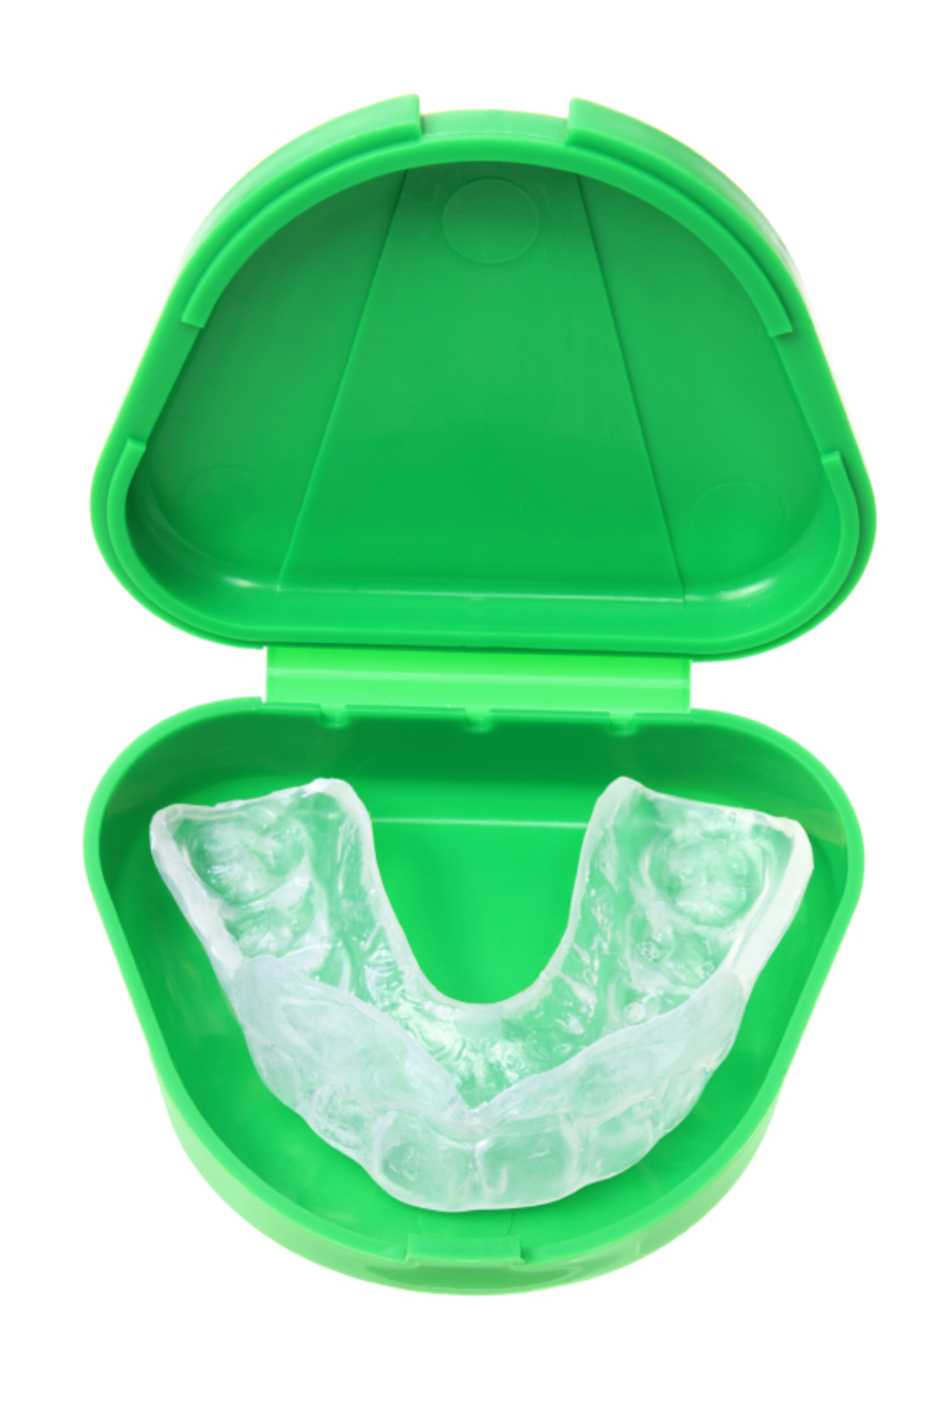 Mouth Guards: A Simple Way to Save Your Smile